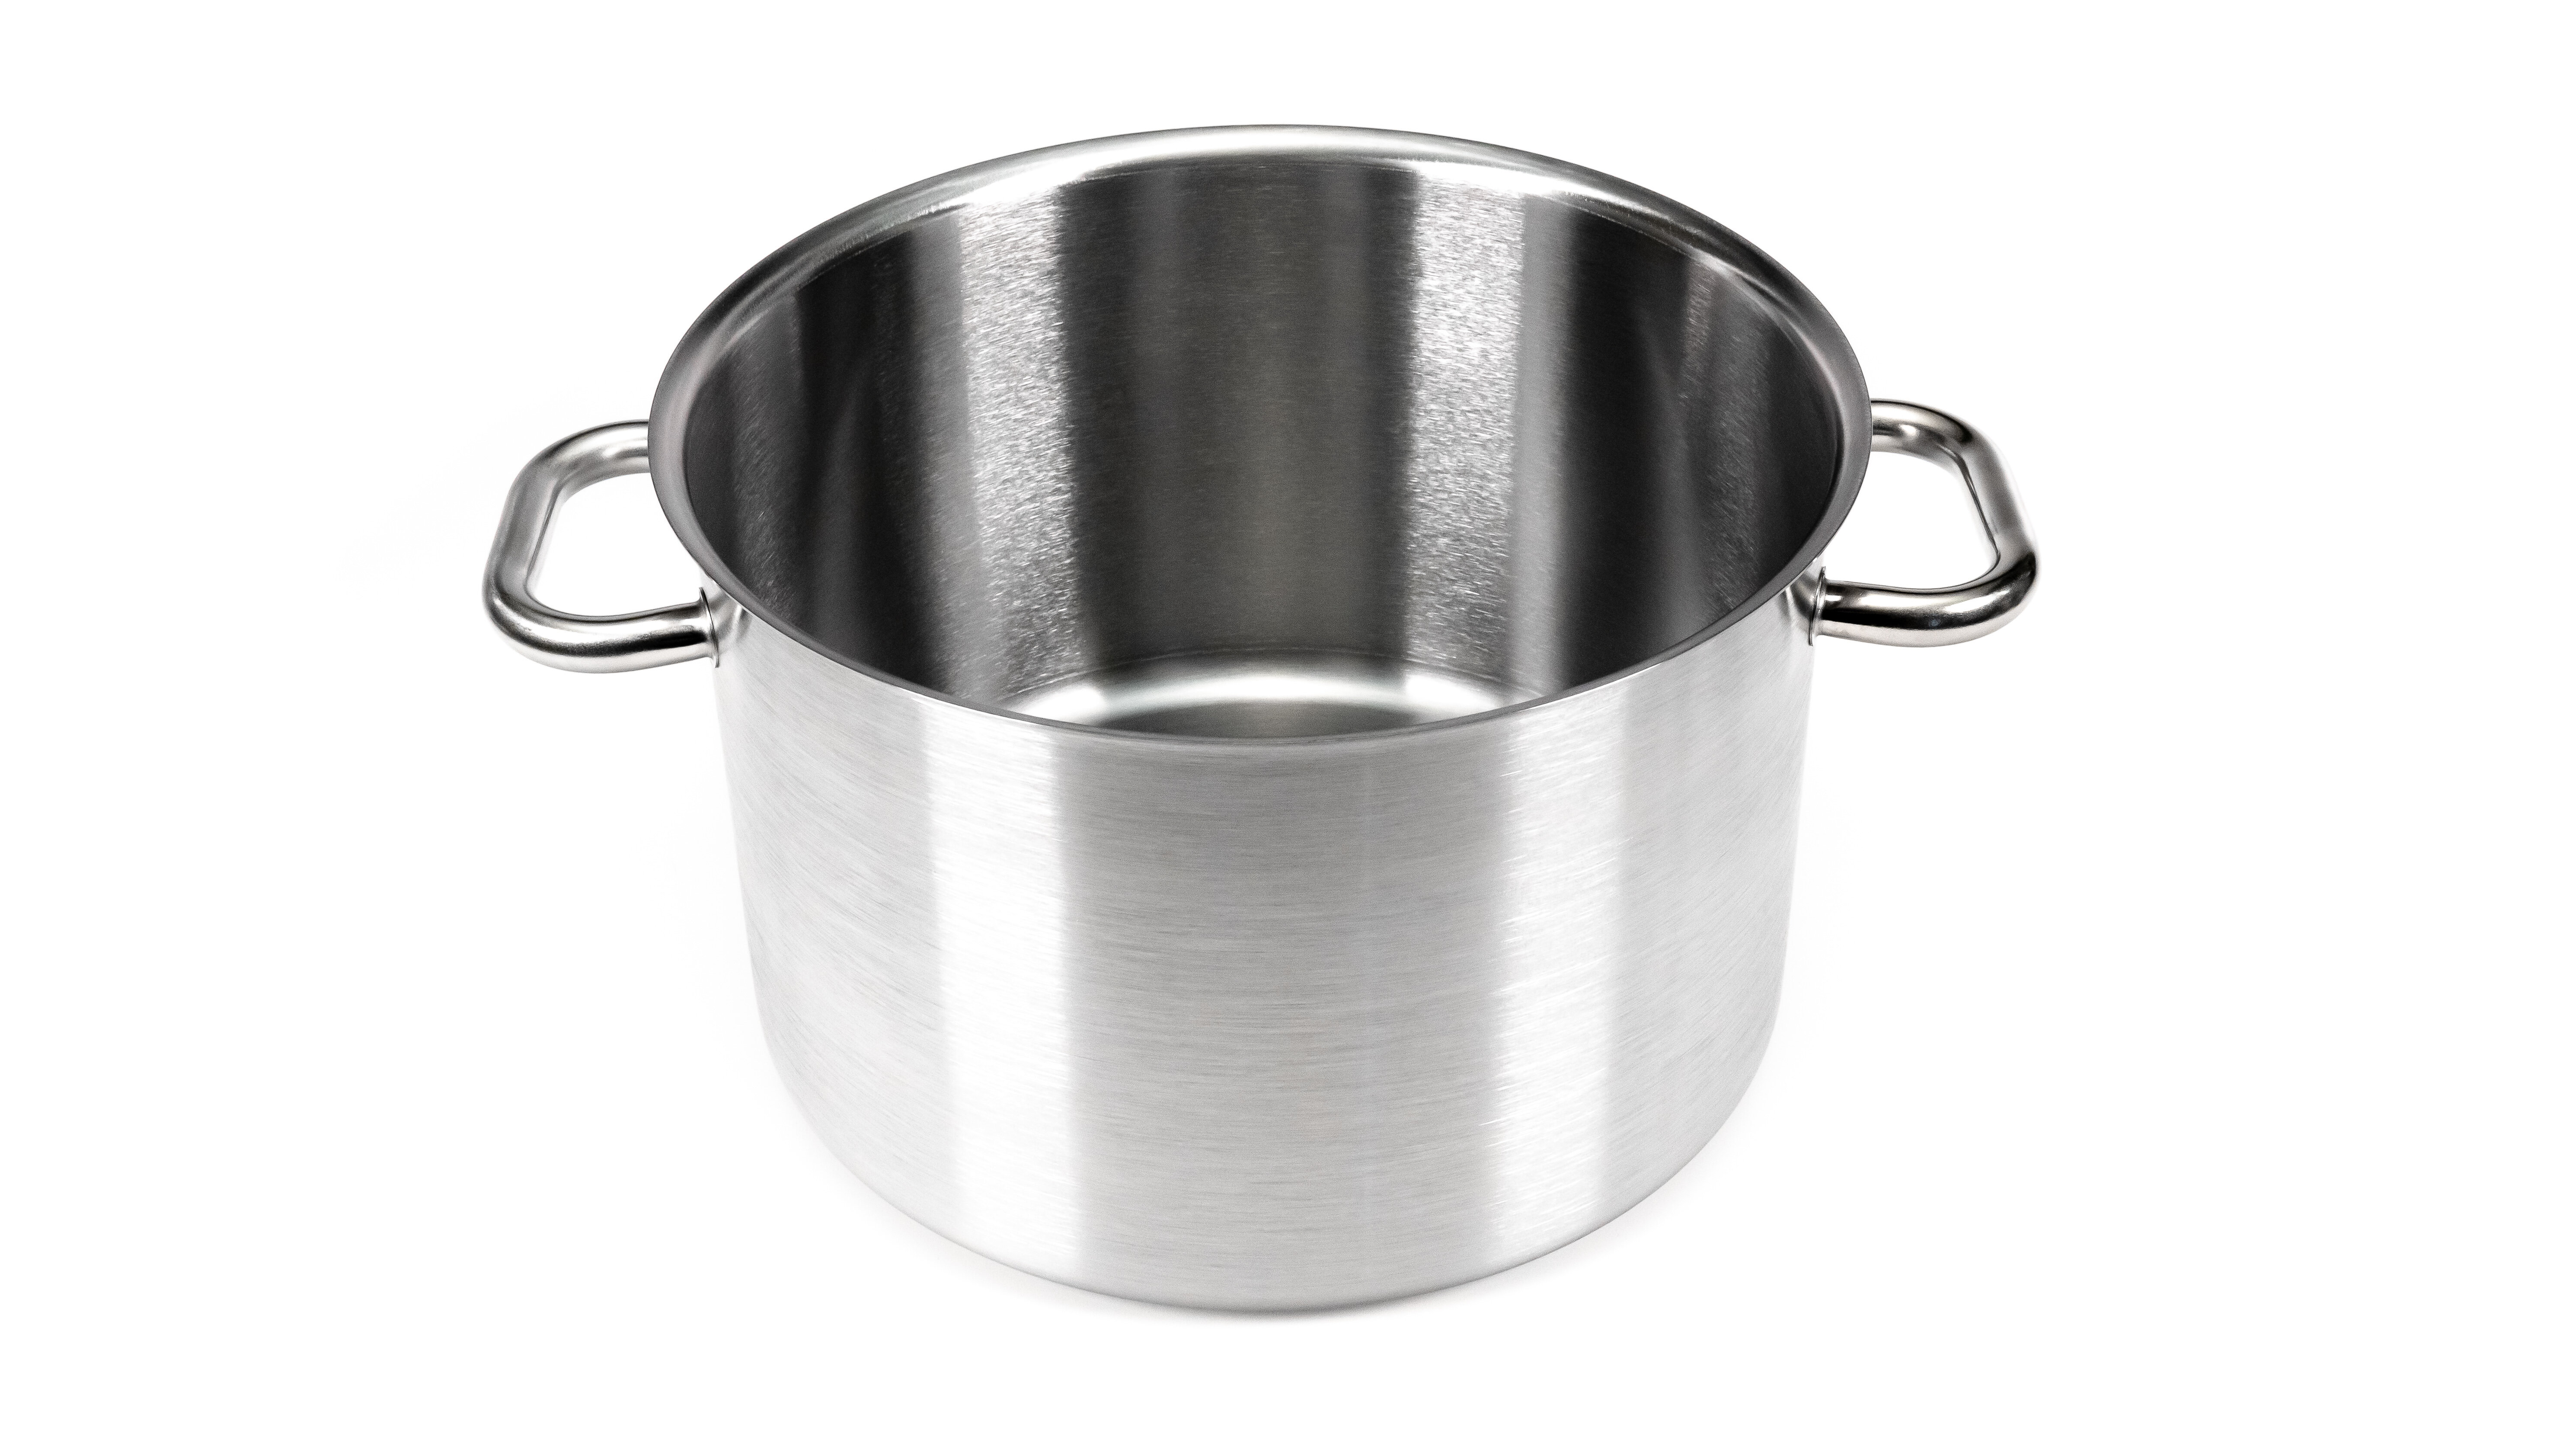 Matfer Bourgeat Excellence Sauce Pan without Lid, 6 1/4-Inch, Gray